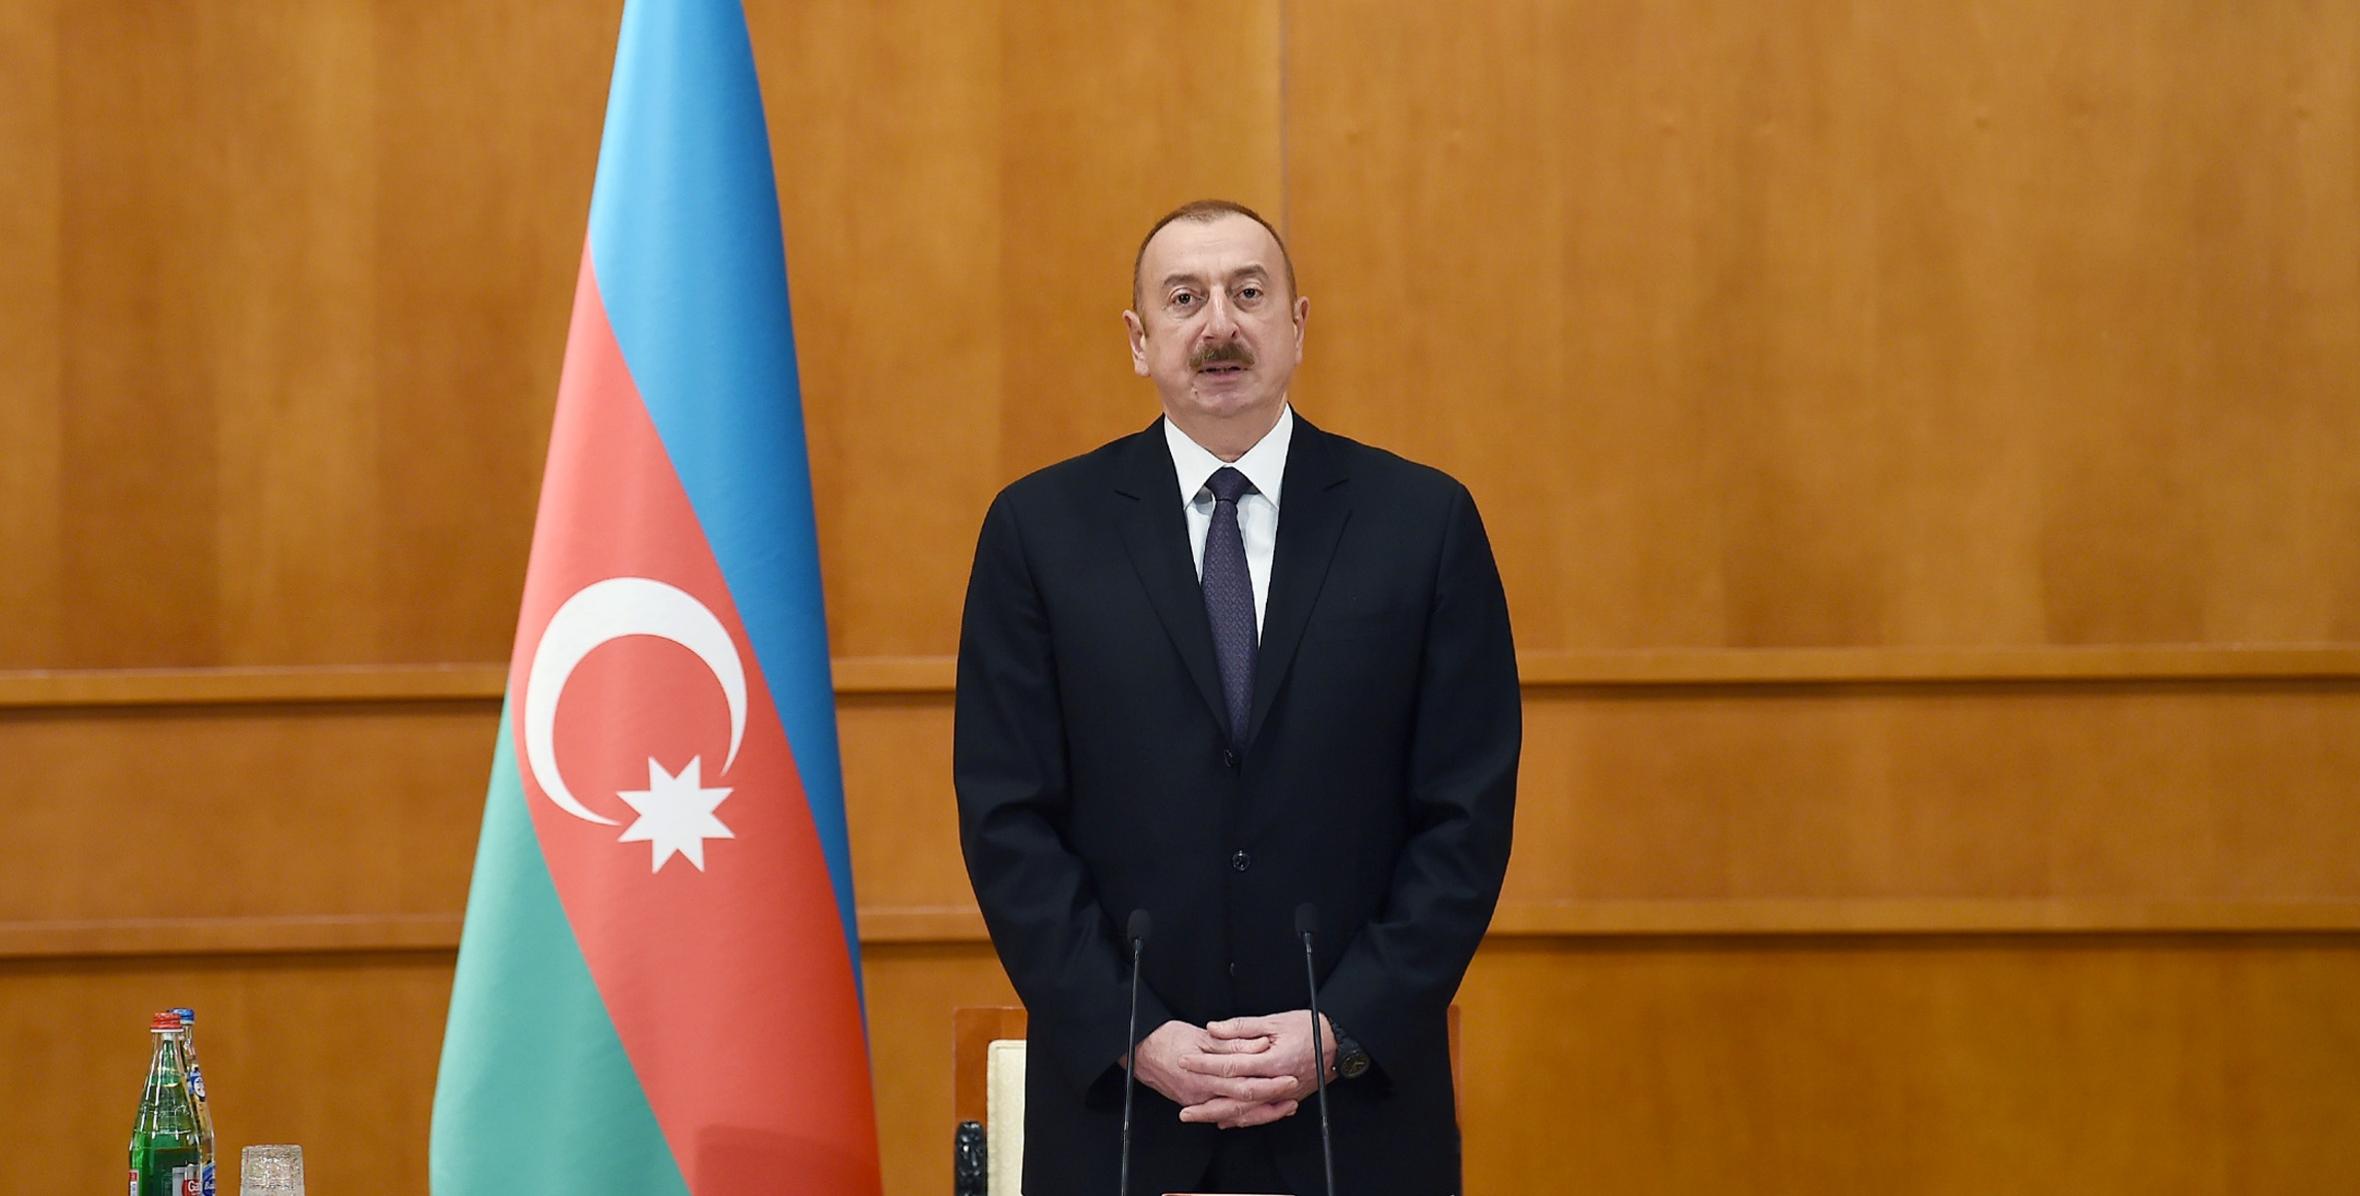 Ilham Aliyev met with martyr families